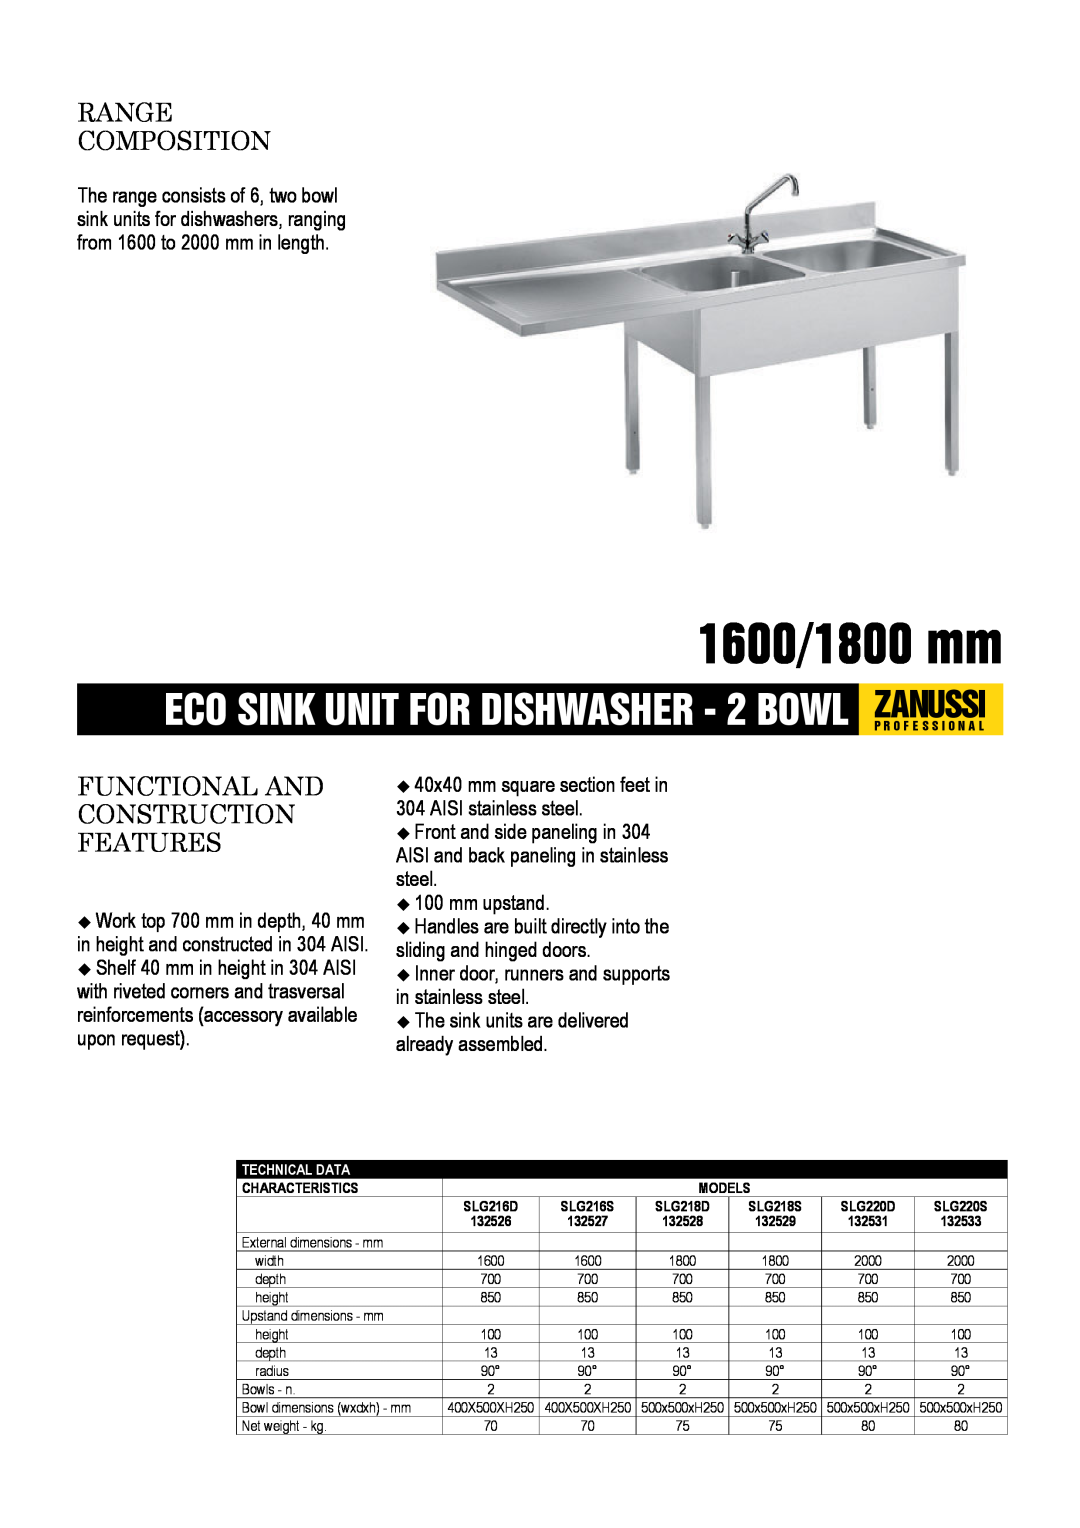 Zanussi SLG216D dimensions 1600/1800 mm, Range Composition, Functional And Construction Features, AISI stainless steel 